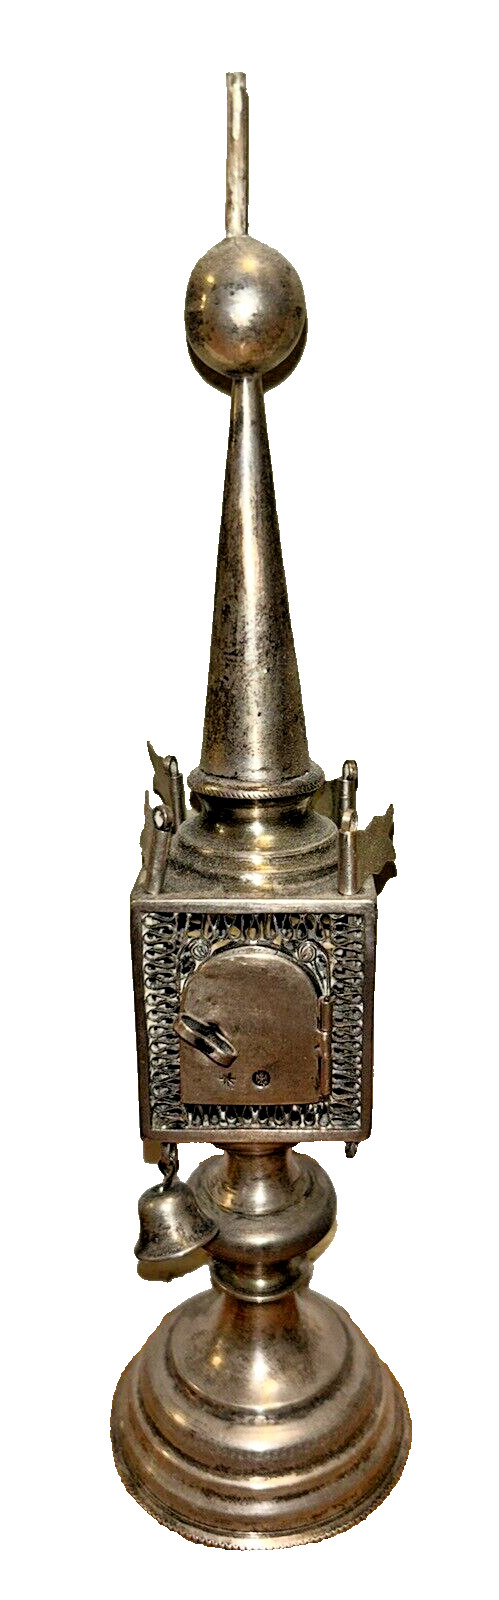 Spice Tower Havdalah Silver Antique Russian 84 Marked Jewish Judaica Look